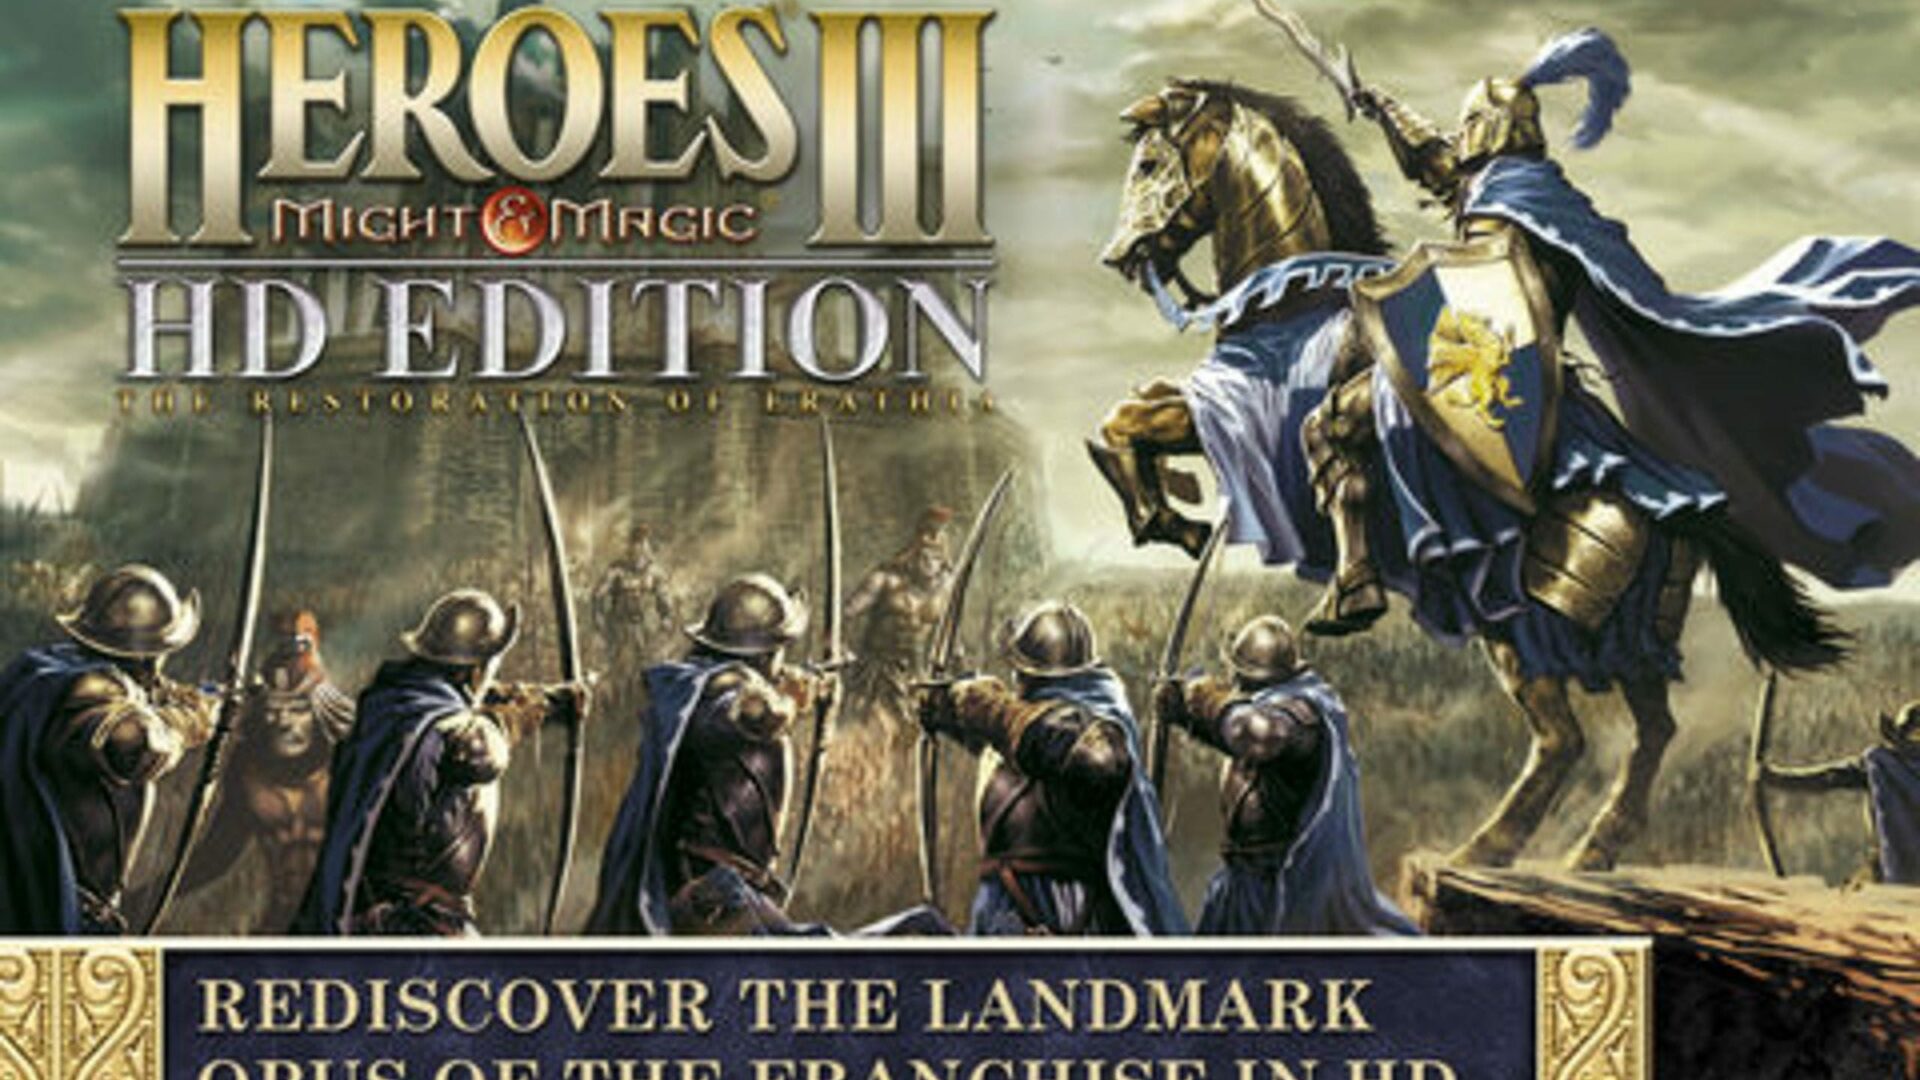 steam heroes of might and magic free